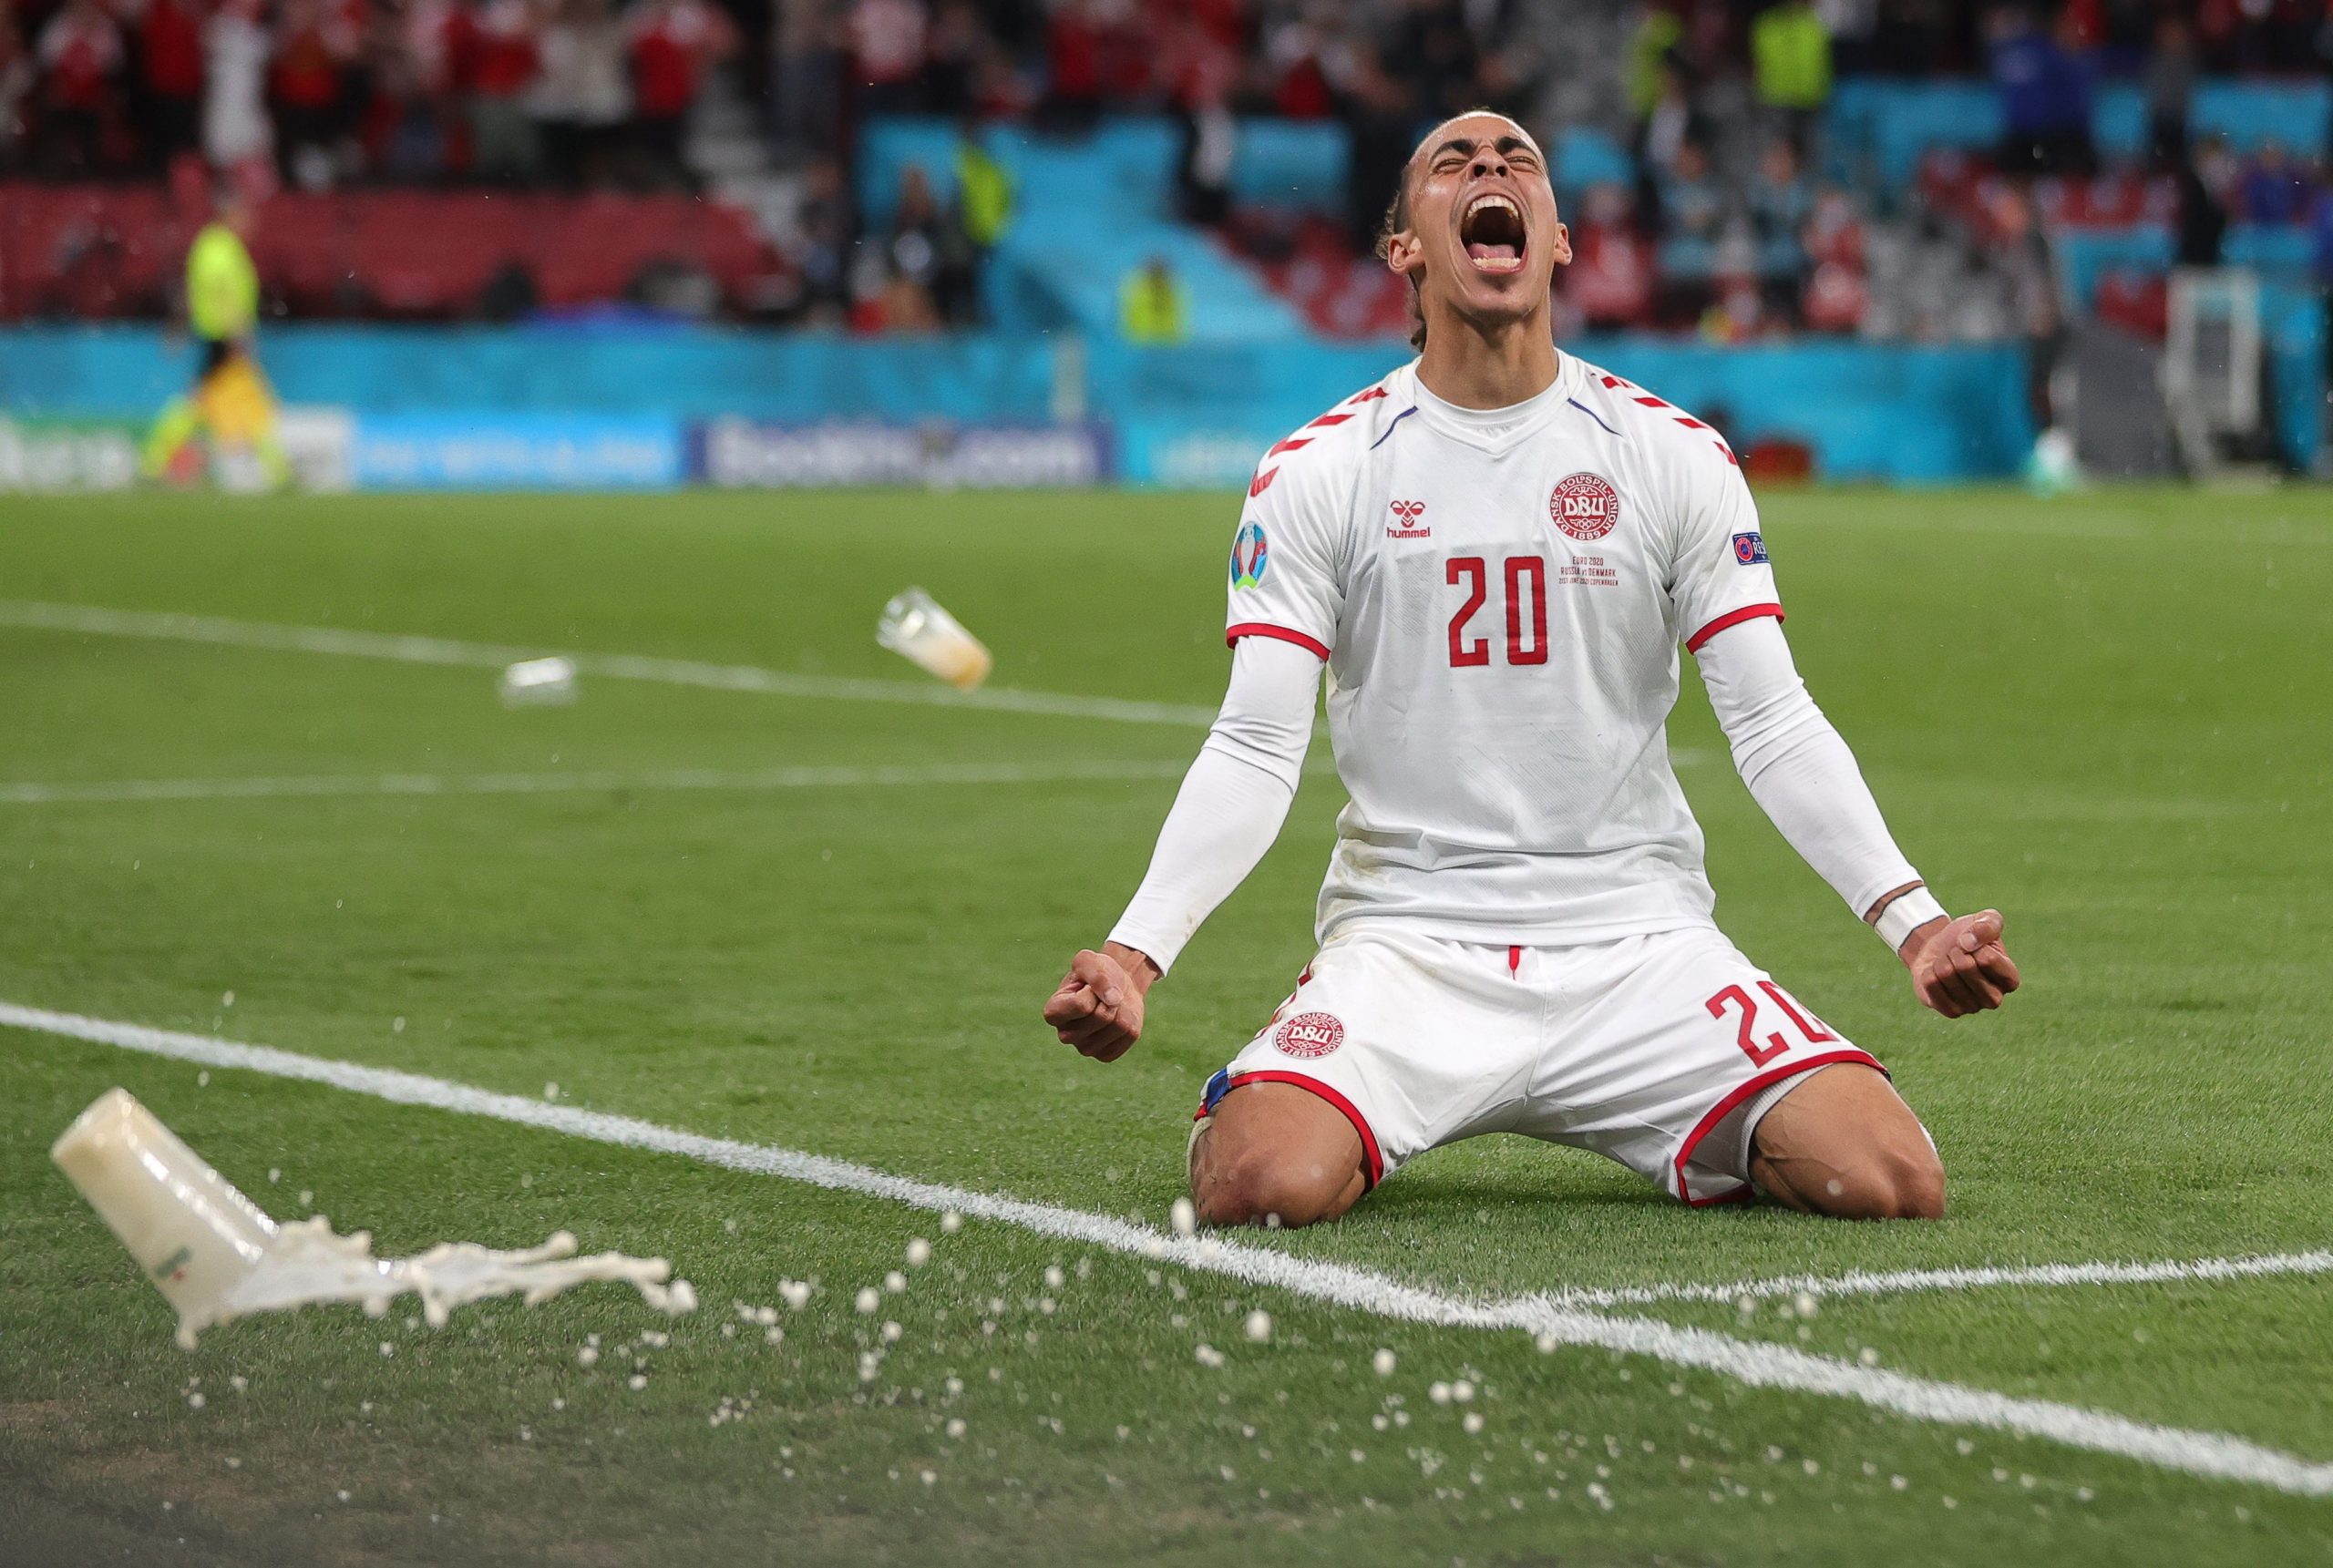 epa09291967 Yussuf Poulsen of Denmark celebrates after scoring the 2-0 lead during the UEFA EURO 2020 group B preliminary round soccer match between Russia and Denmark in Copenhagen, Denmark, 21 June 2021.  EPA/Friedemann Vogel / POOL (RESTRICTIONS: For editorial news reporting purposes only. Images must appear as still images and must not emulate match action video footage. Photographs published in online publications shall have an interval of at least 20 seconds between the posting.)